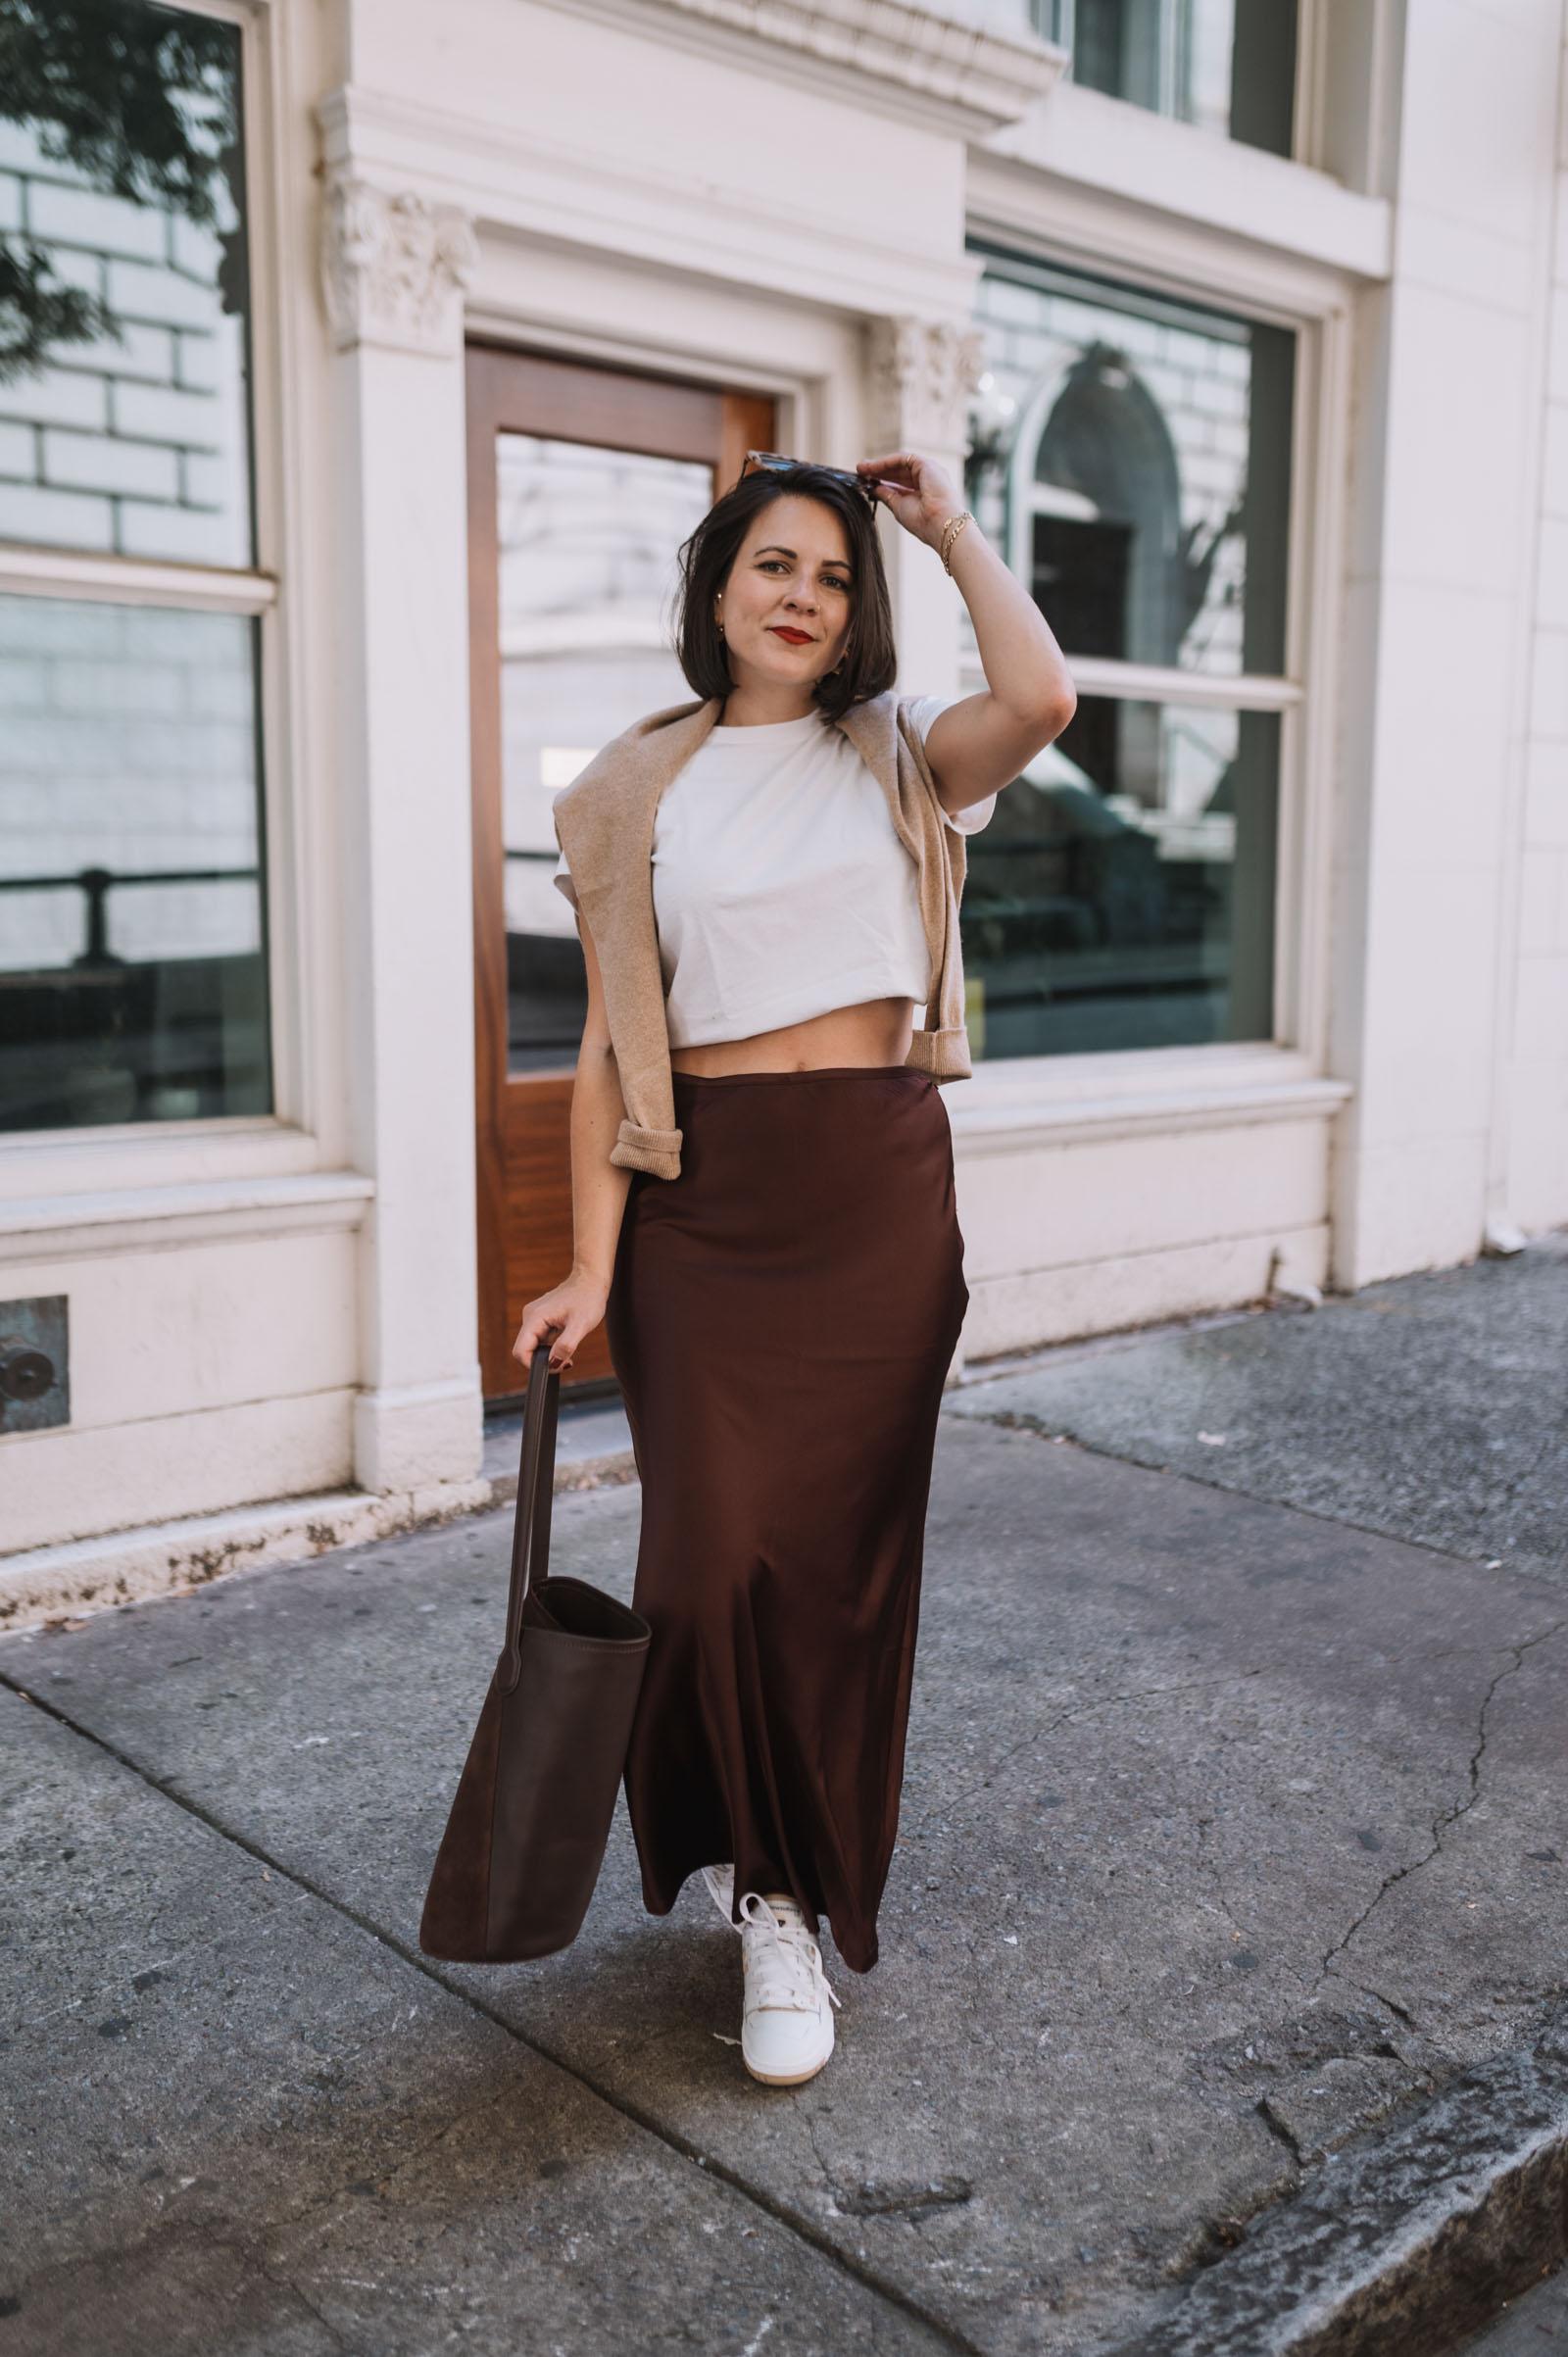 Lioness satin maxi skirt, reformation tee, j.crew sweater, new balance sneakers